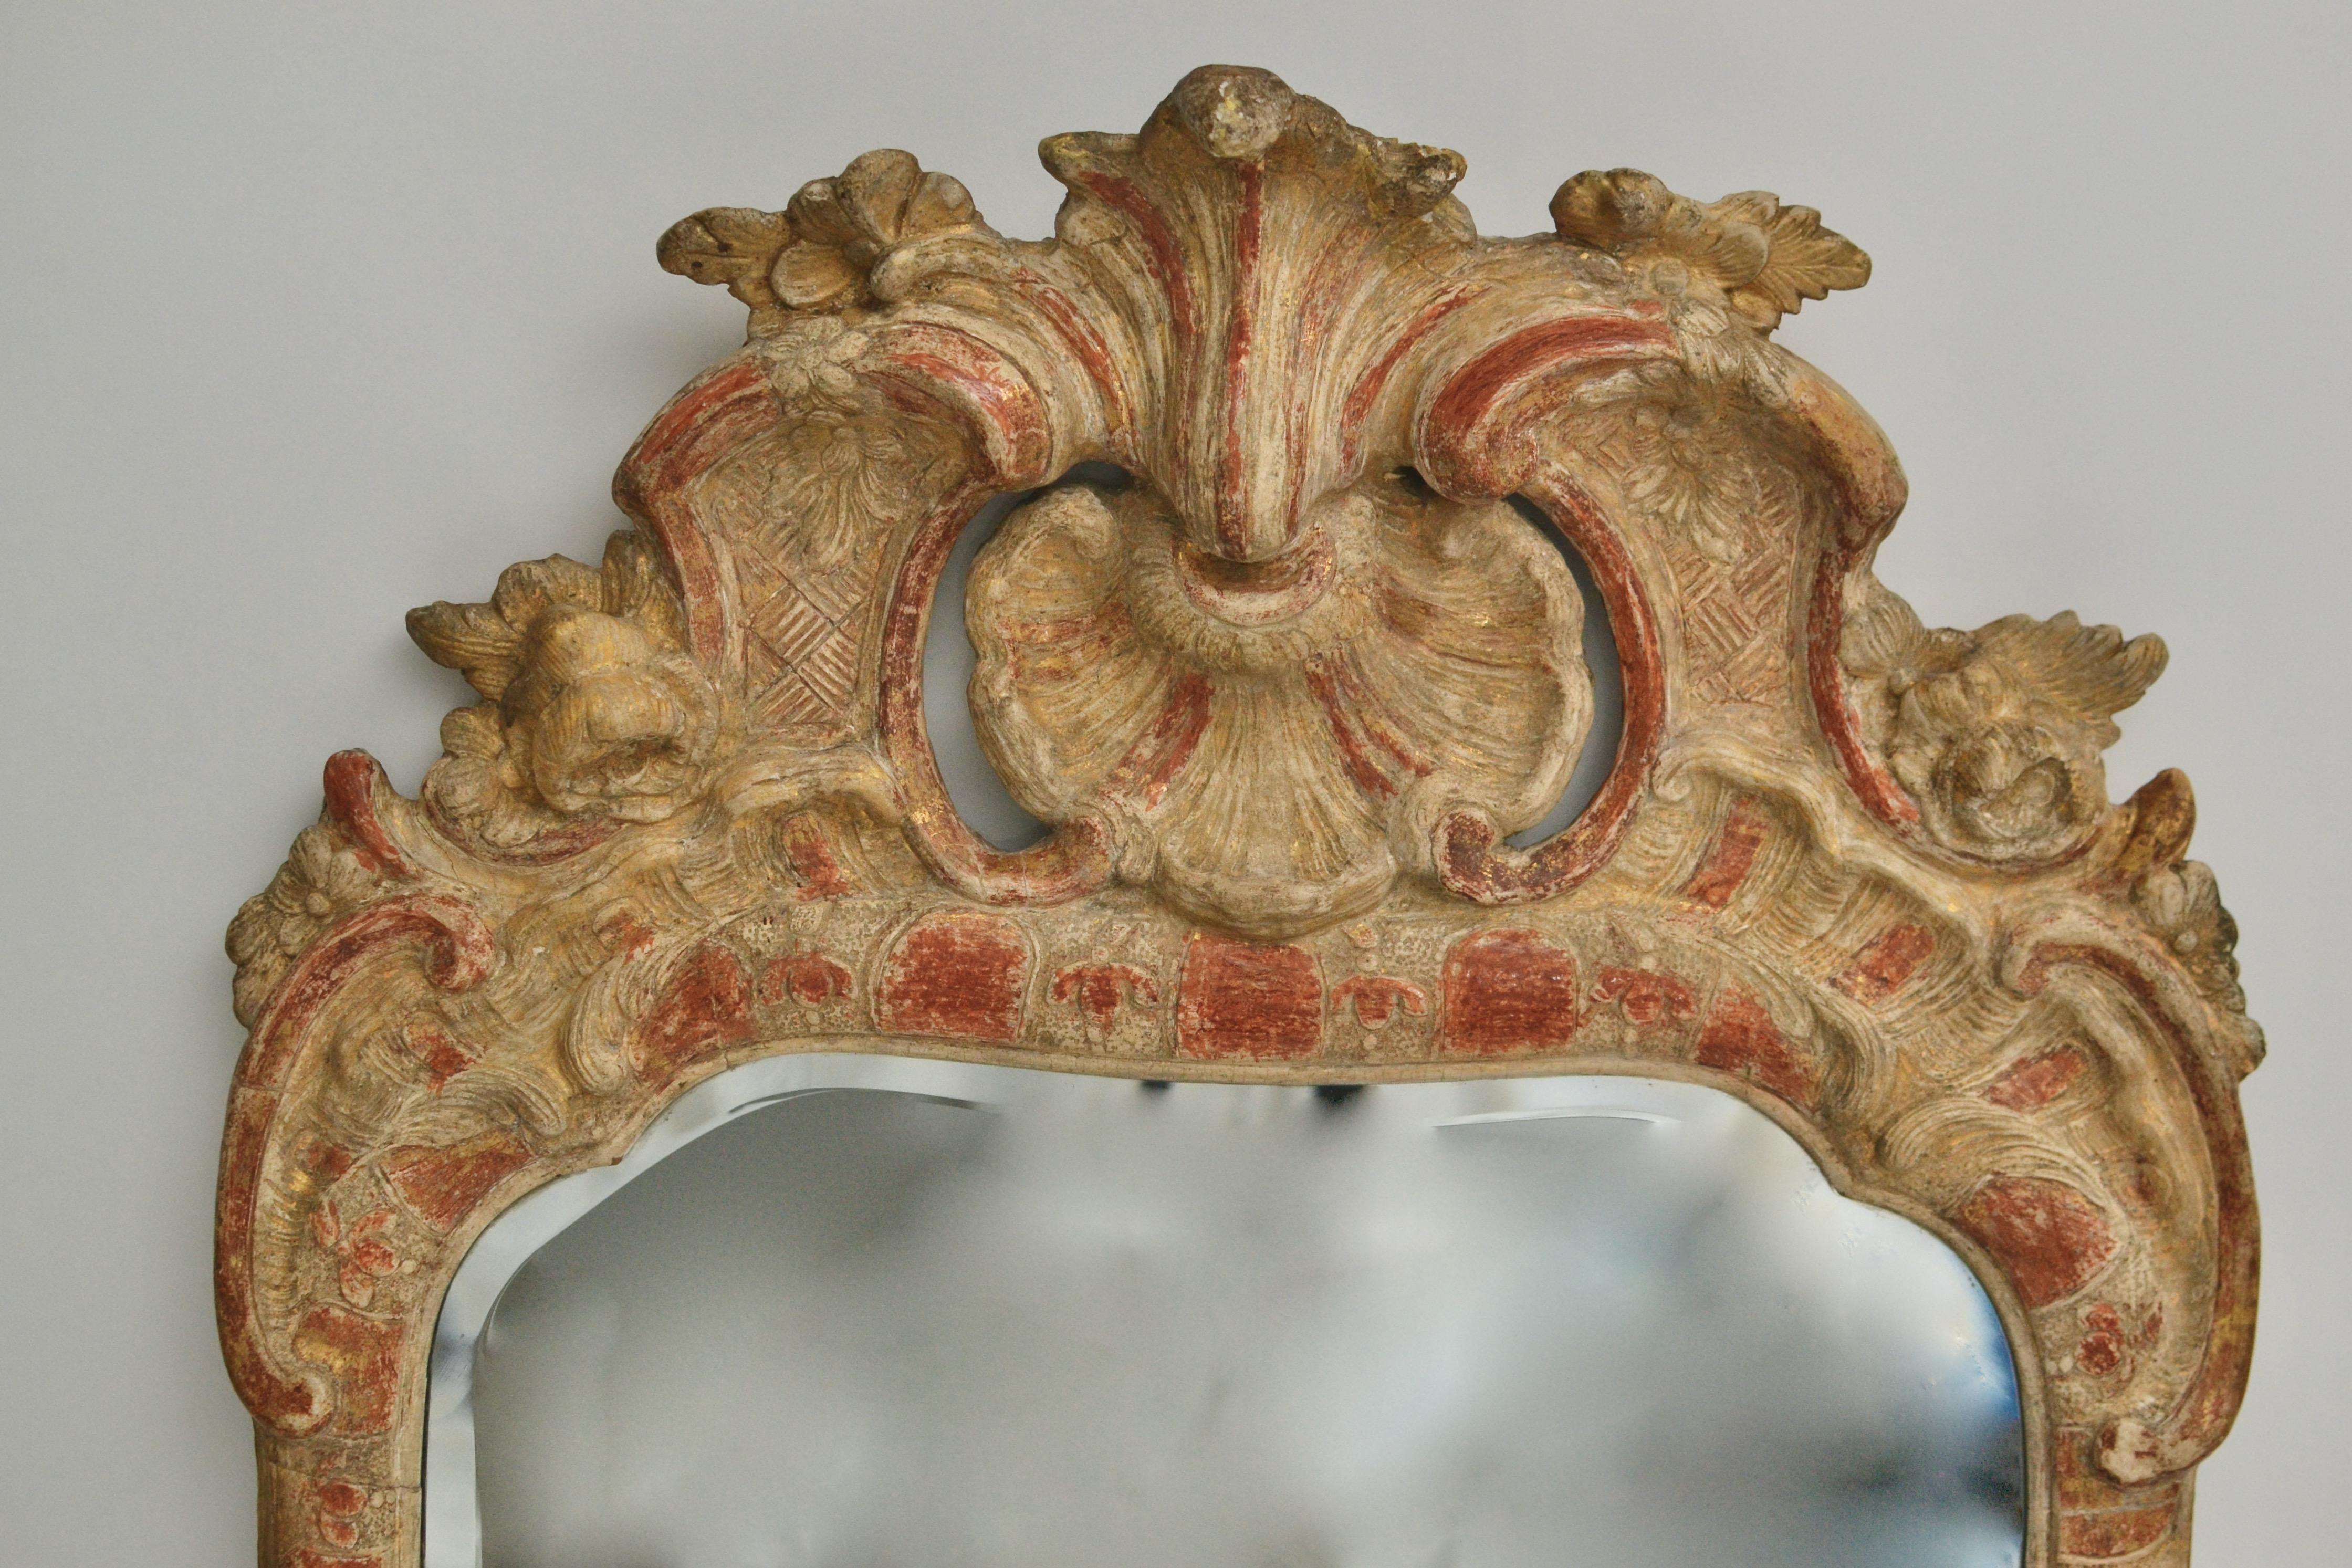 A Swedish 18th century gilt wood mirror made circa 1760 in Stockholm. The gilding is heavily worn and now there is a beautiful patina surface. 

 